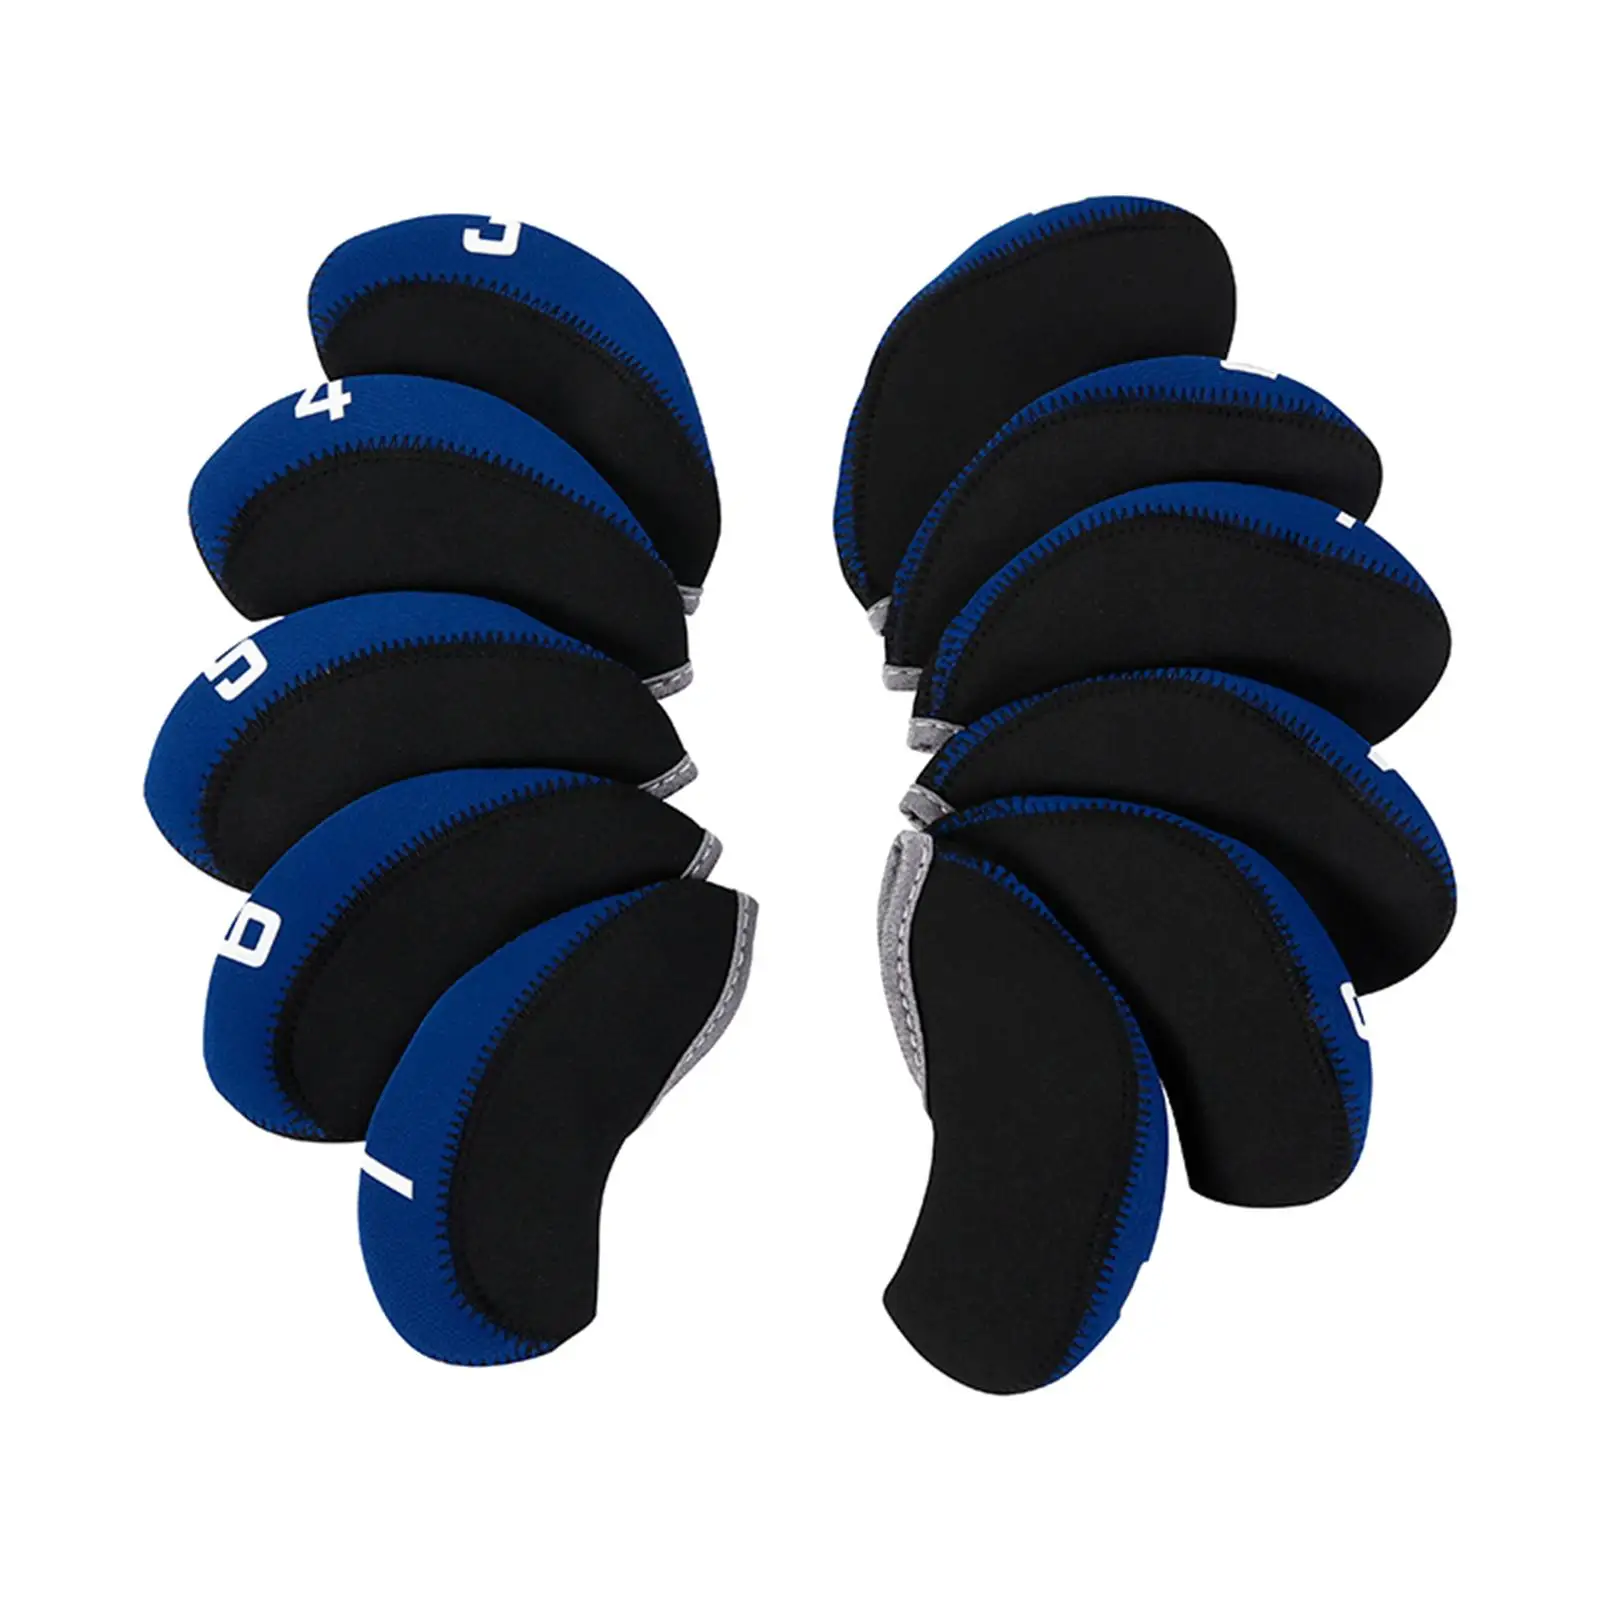 

11Pcs/Set Golf Club Covers Set for Irons Neoprene Number Print Headcovers 3, 4, 5, 6, 7, 8, 9, A, P, Sw L